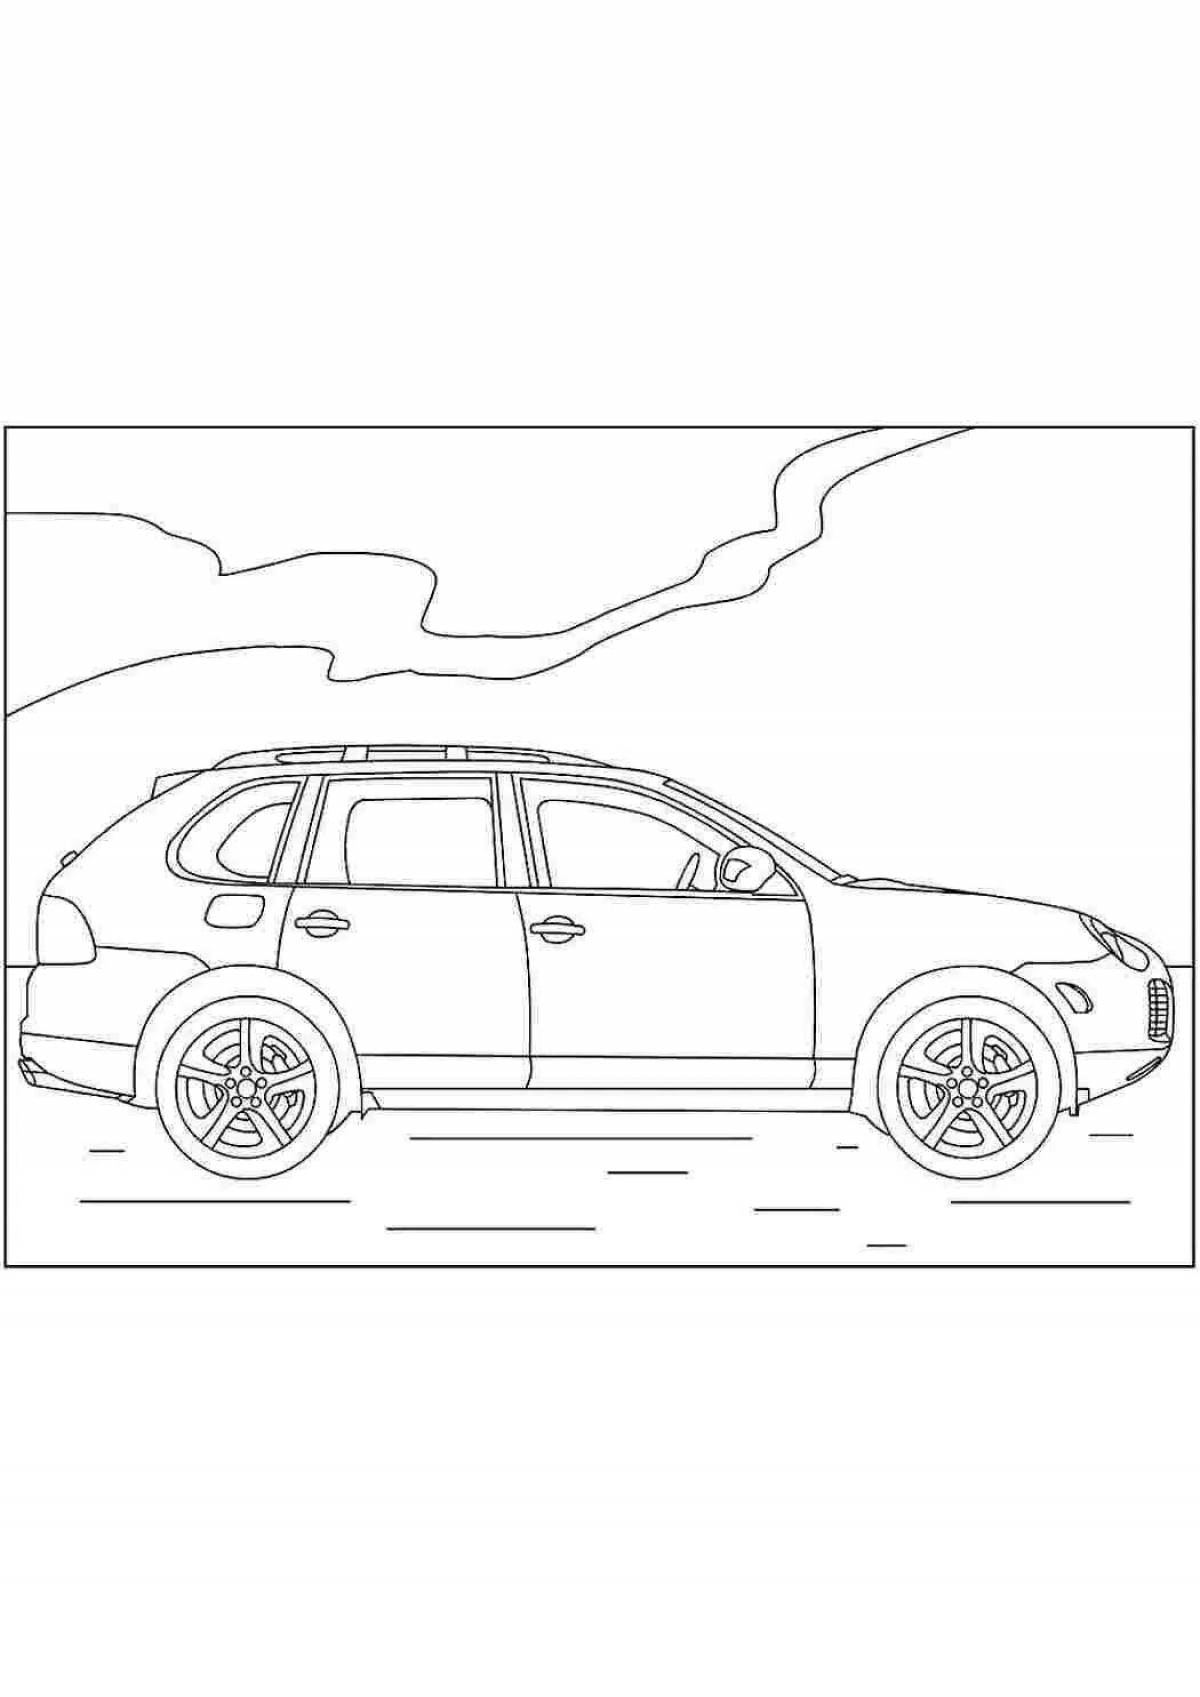 Amazing porsche coloring book for kids